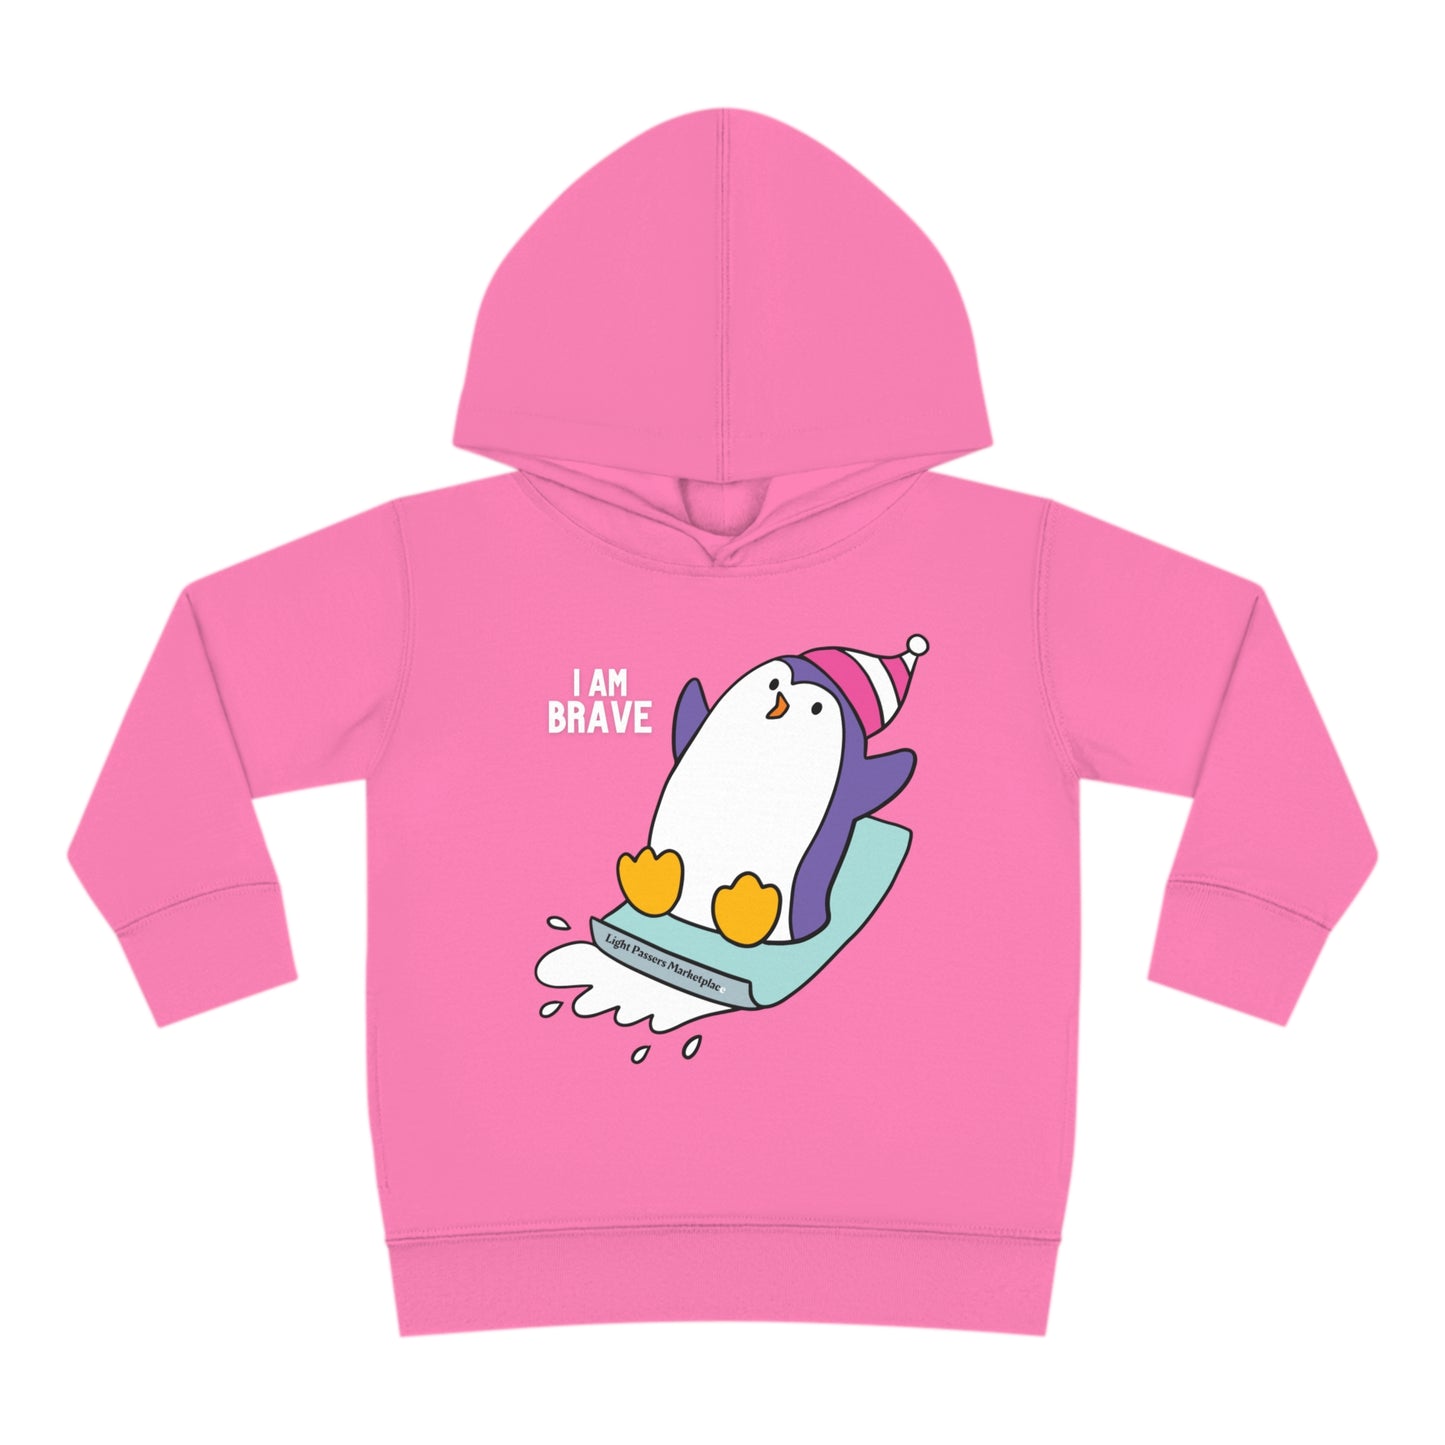 A Rabbit Skins toddler hoodie featuring a Brave Penguin design, with jersey-lined hood, cover-stitched details, and side seam pockets for lasting comfort and durability.